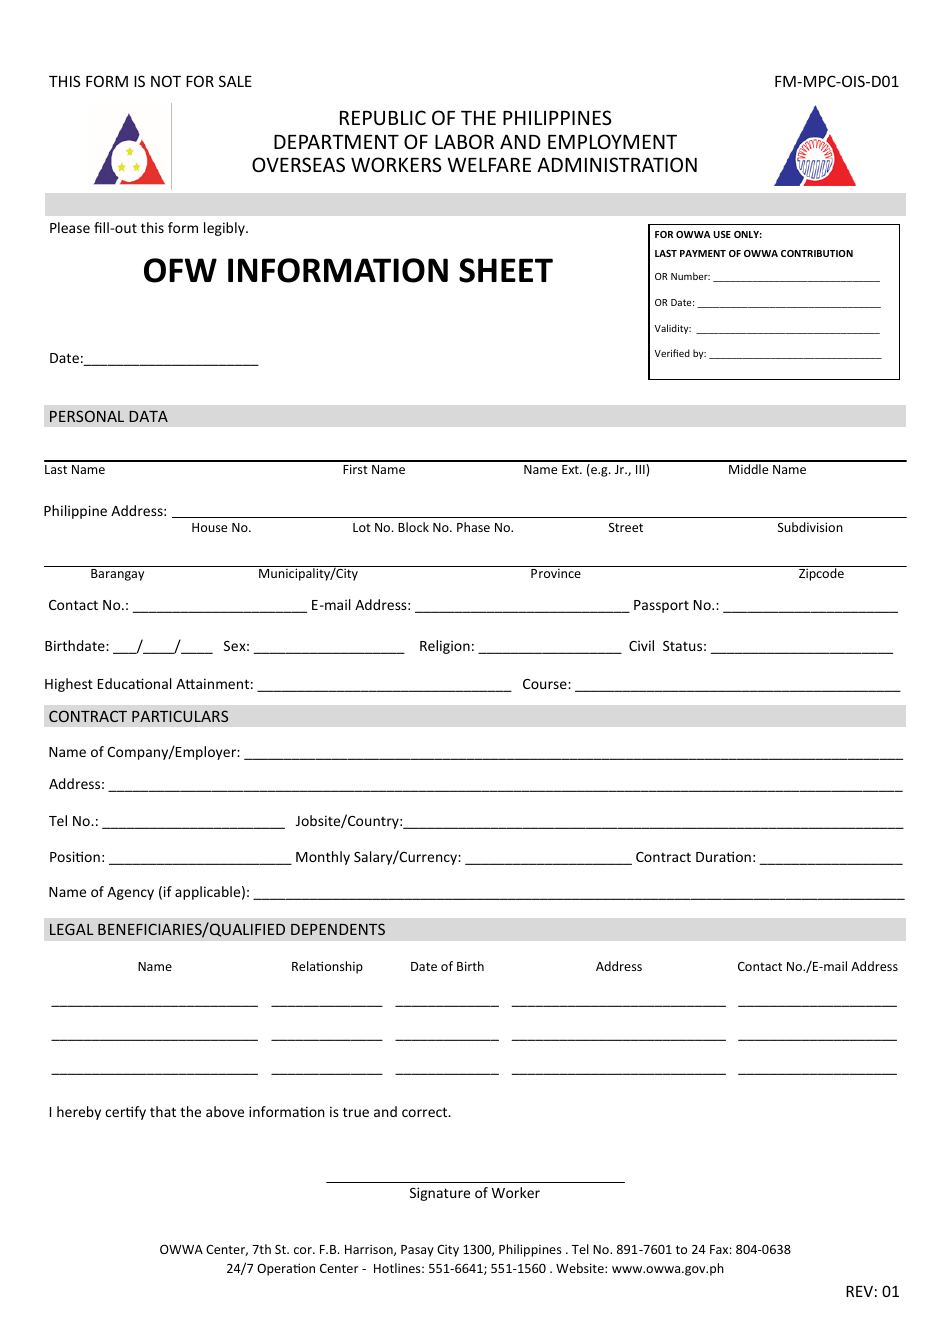 Form FM-MPC-OIS-D01 Ofw Information Sheet - Philippines, Page 1